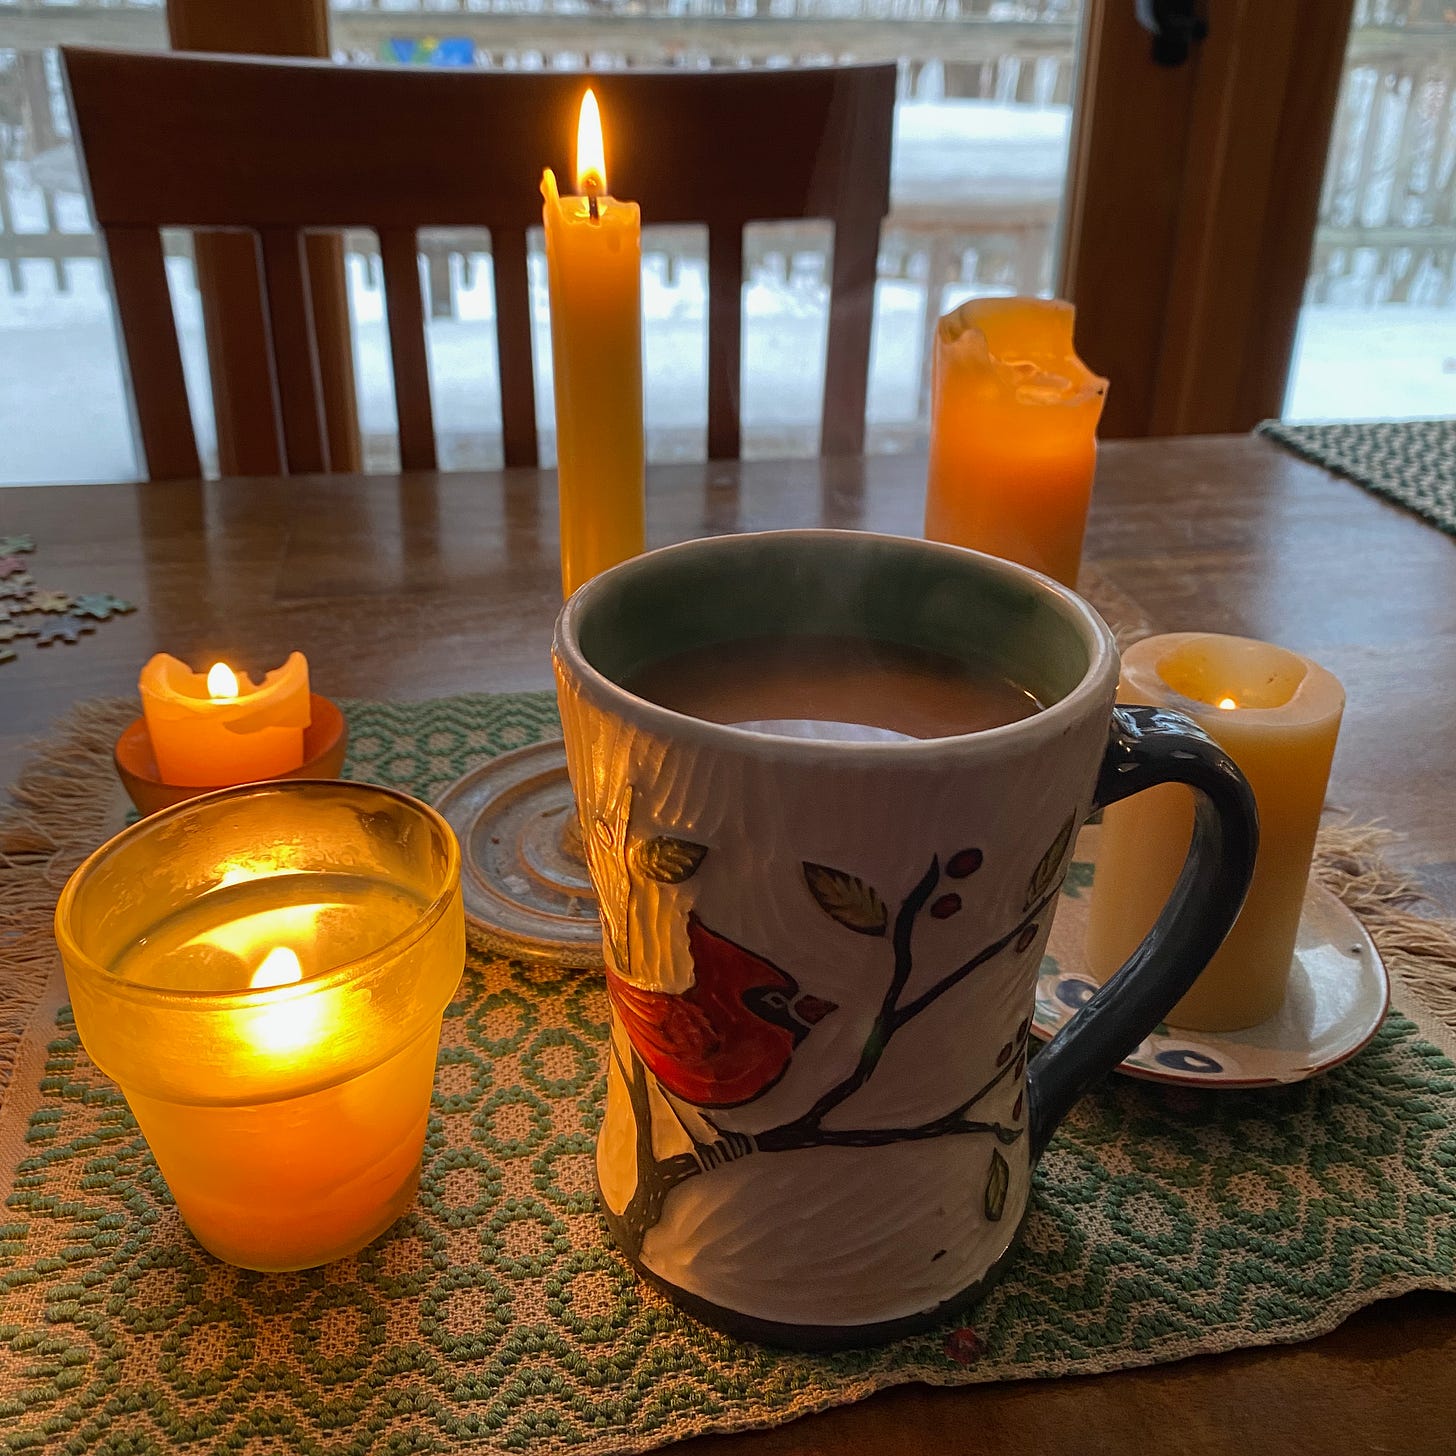 A ceramic mug of tea with a cardinal painted on it surrounded by several lit candles of various sizes.